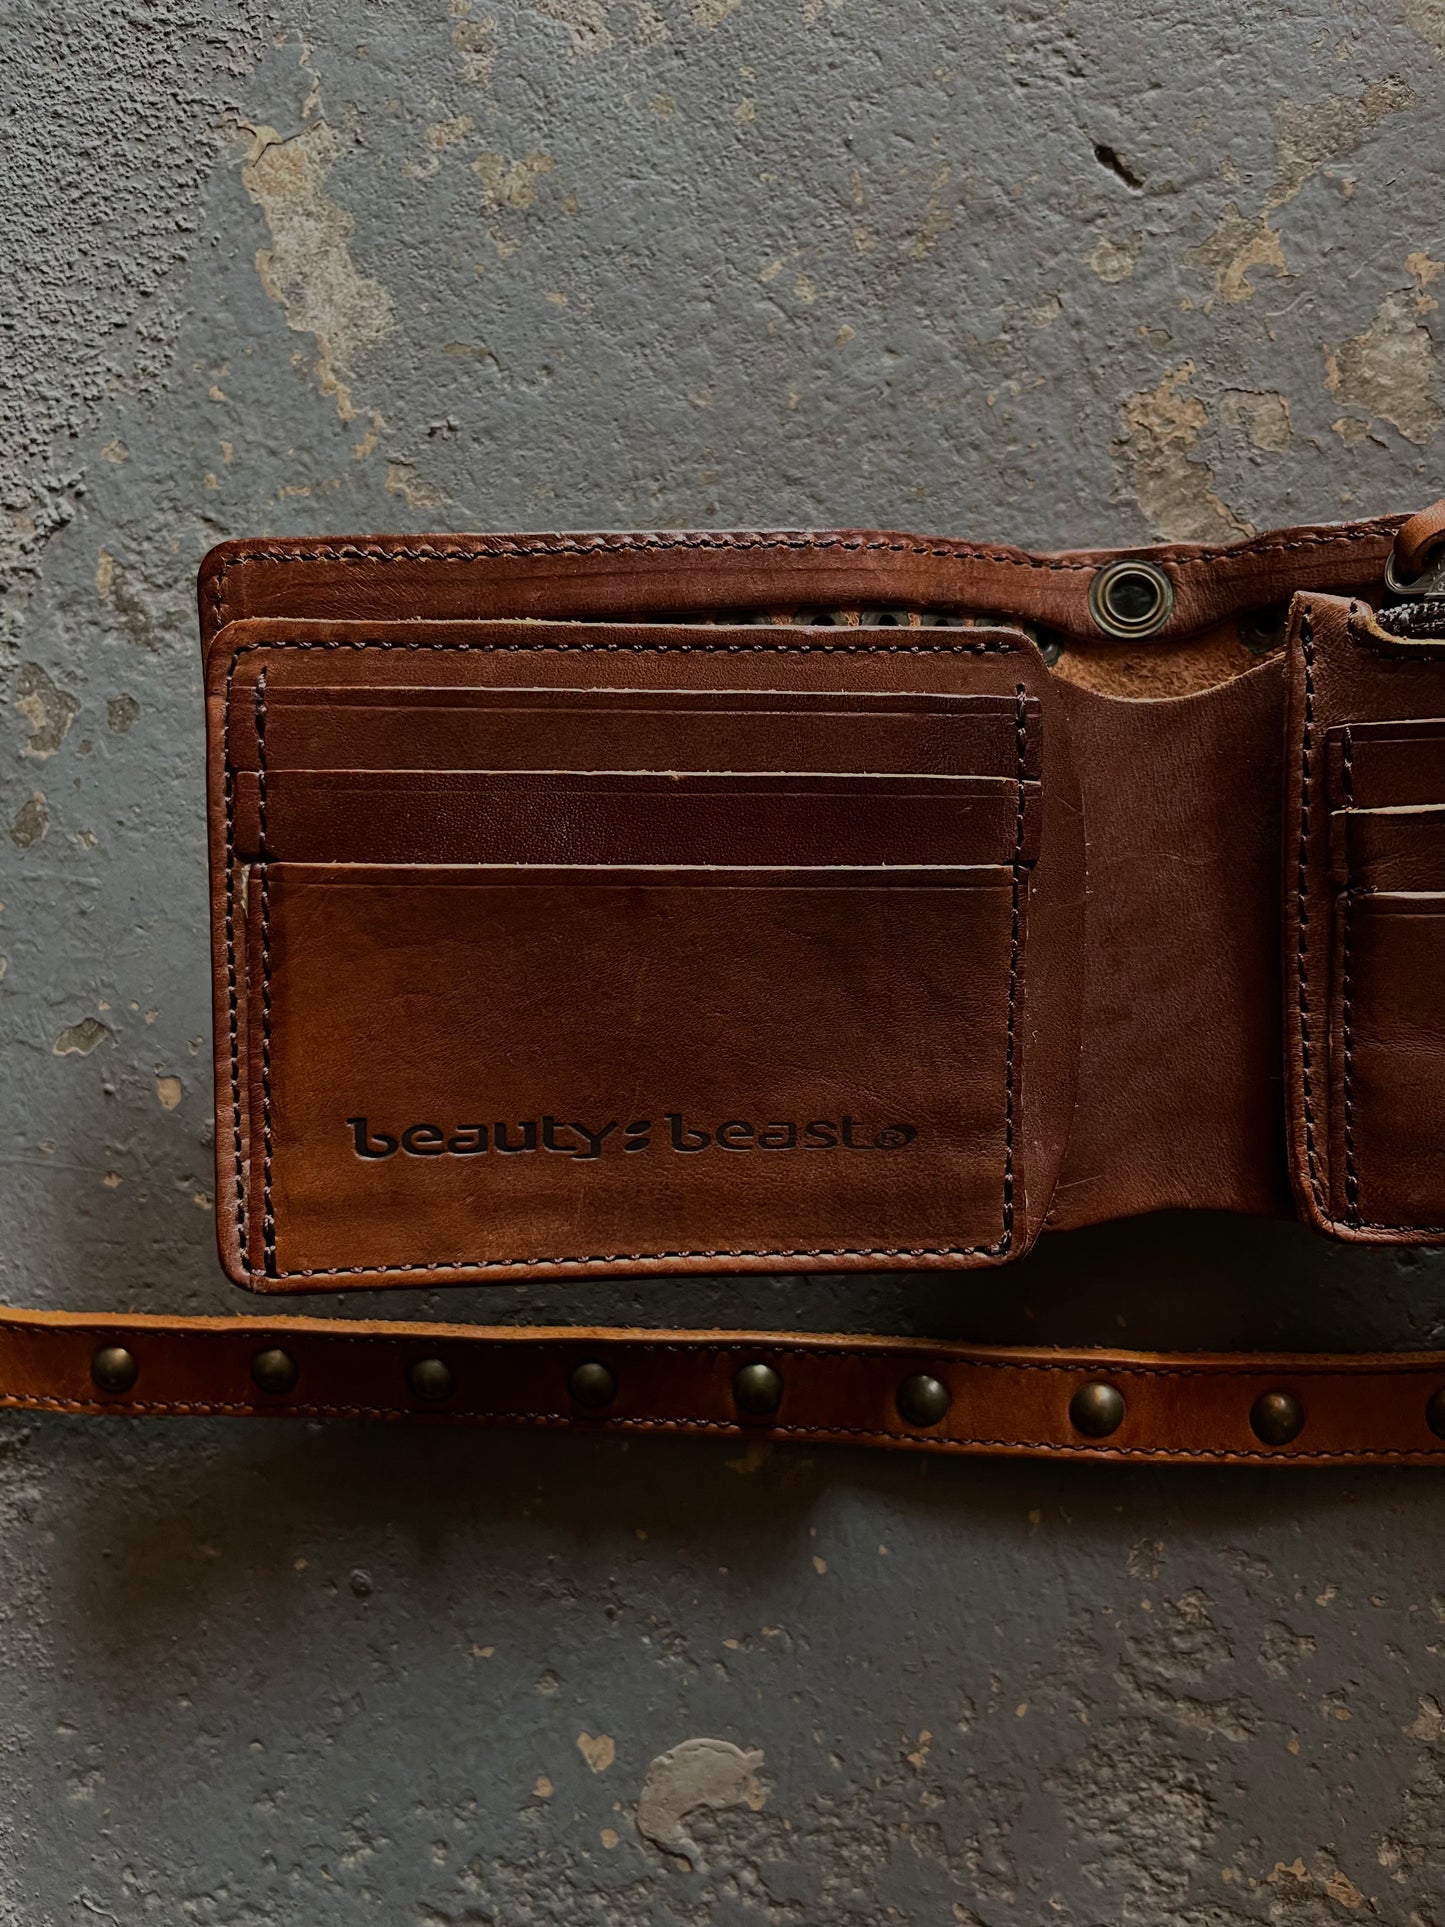 Beauty:Beast 90’s Studded Leather Wallet & Leather Chain